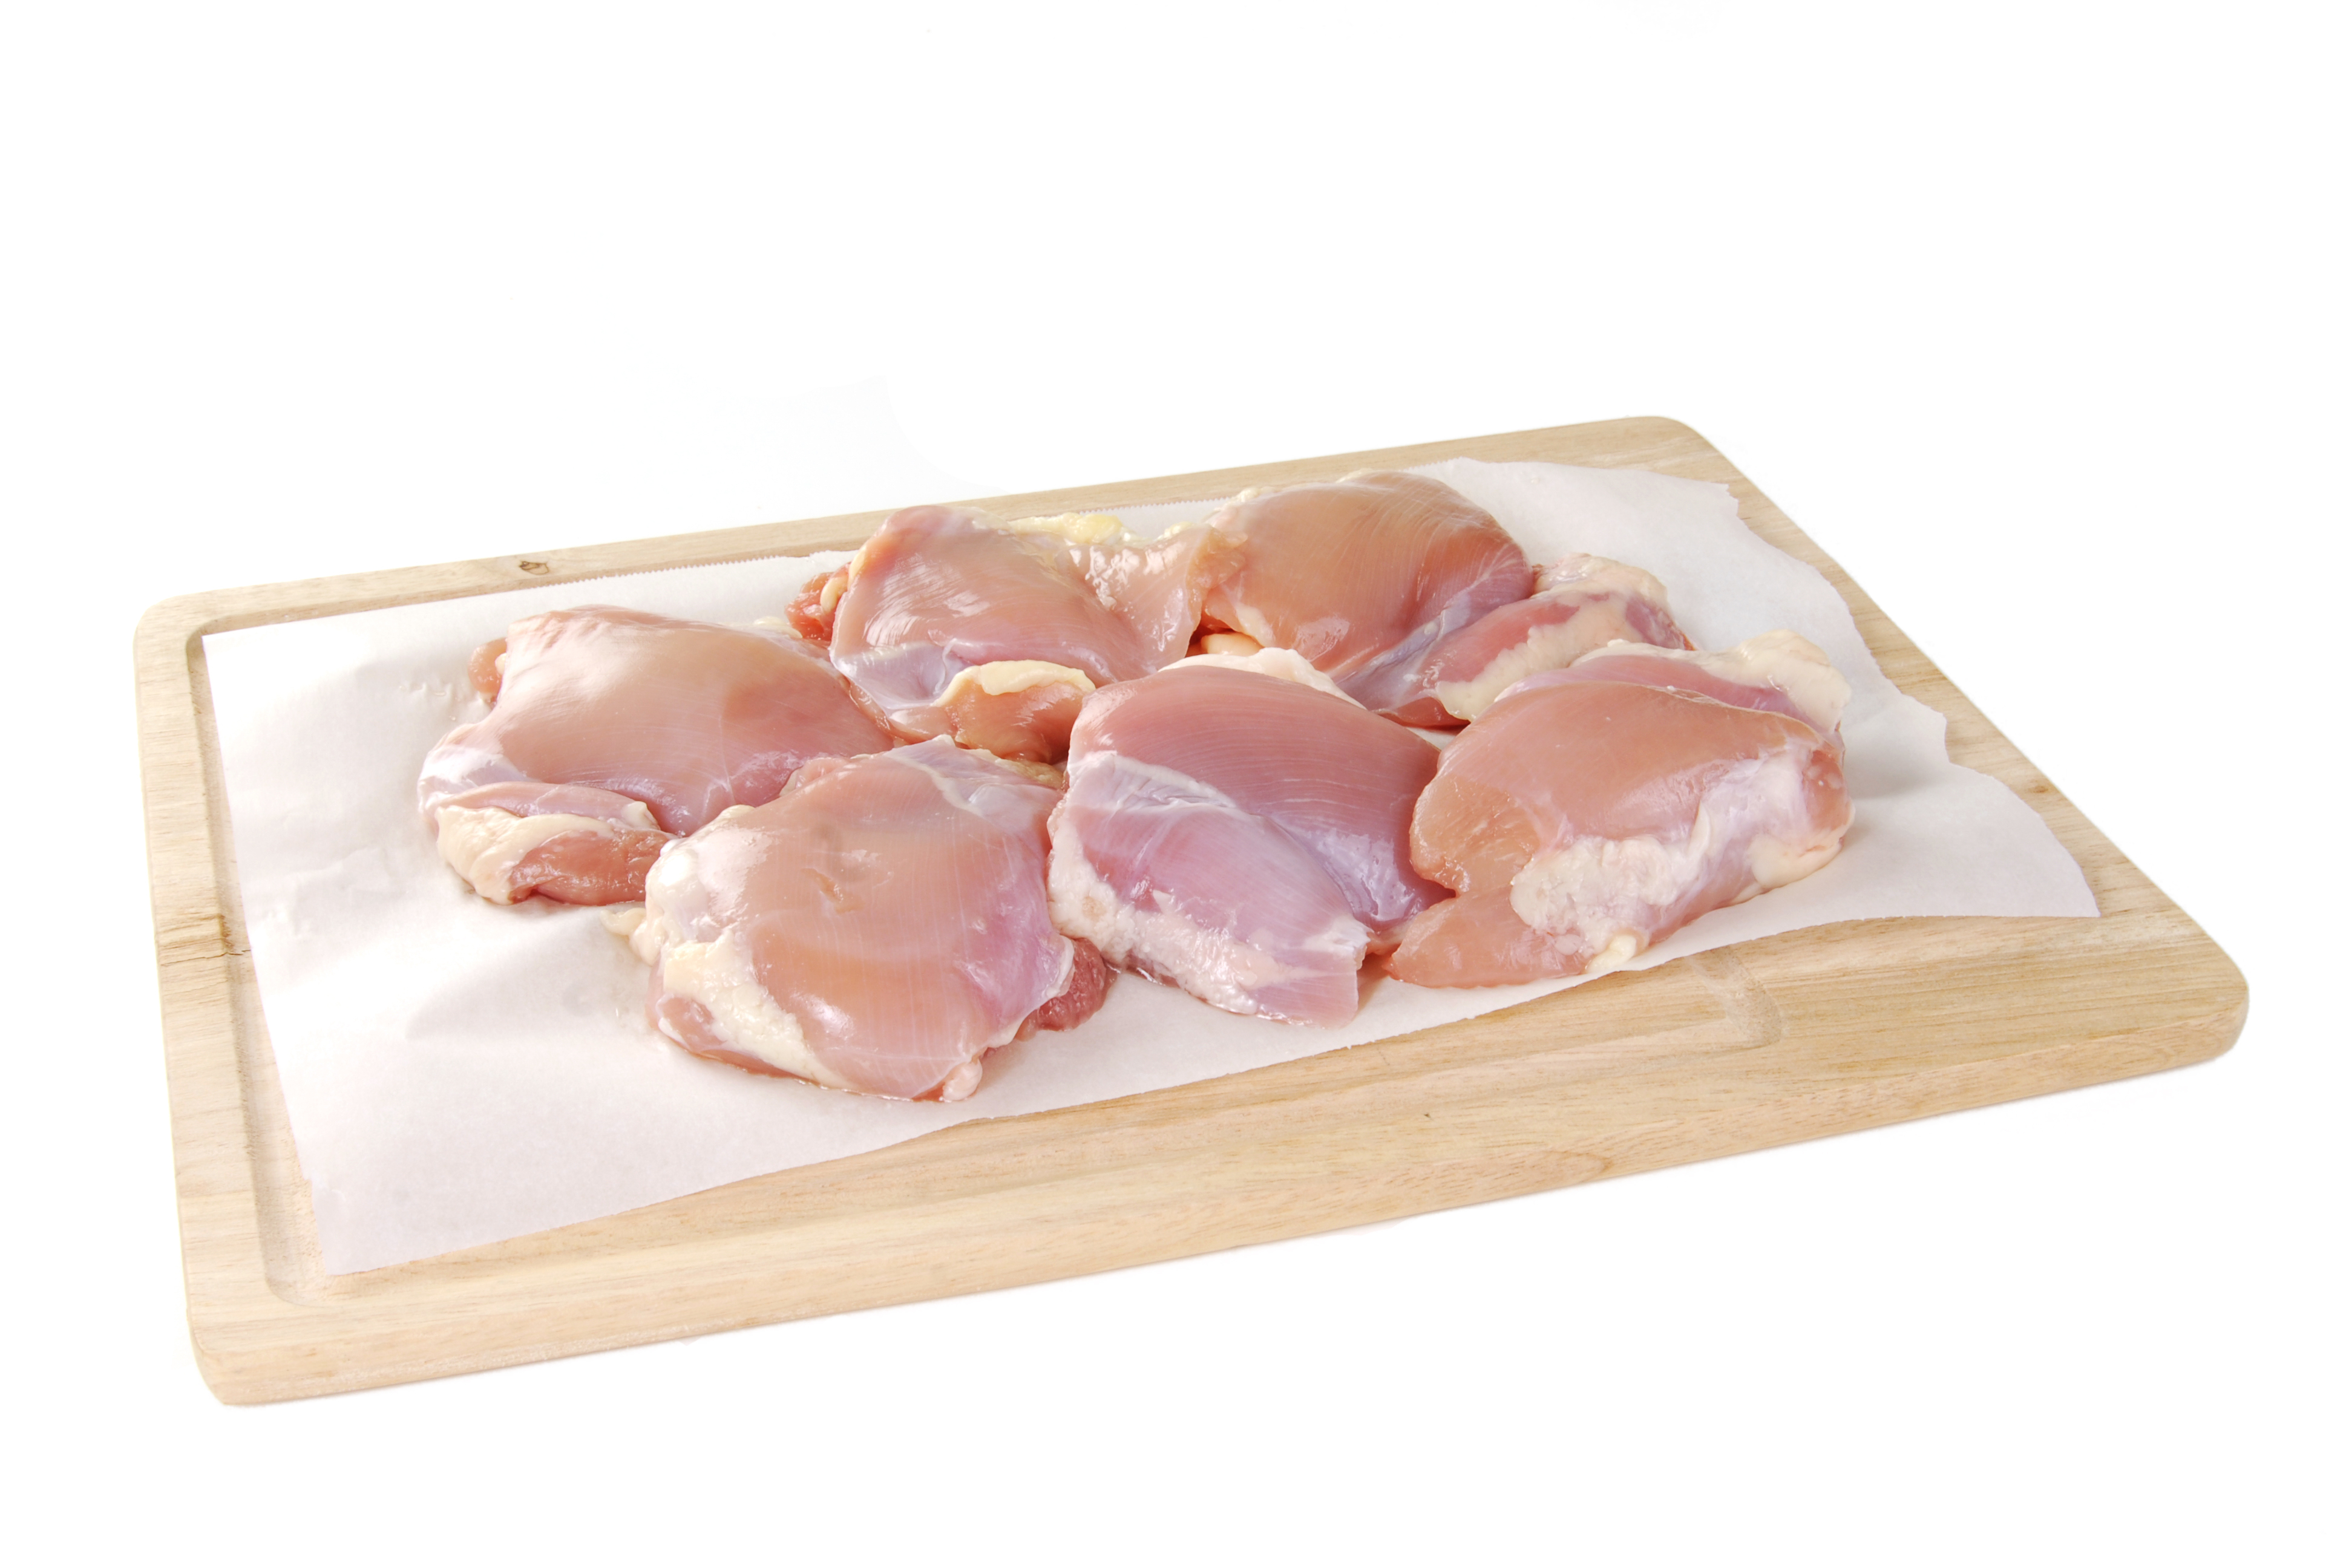 Meat and Poultry Packaging